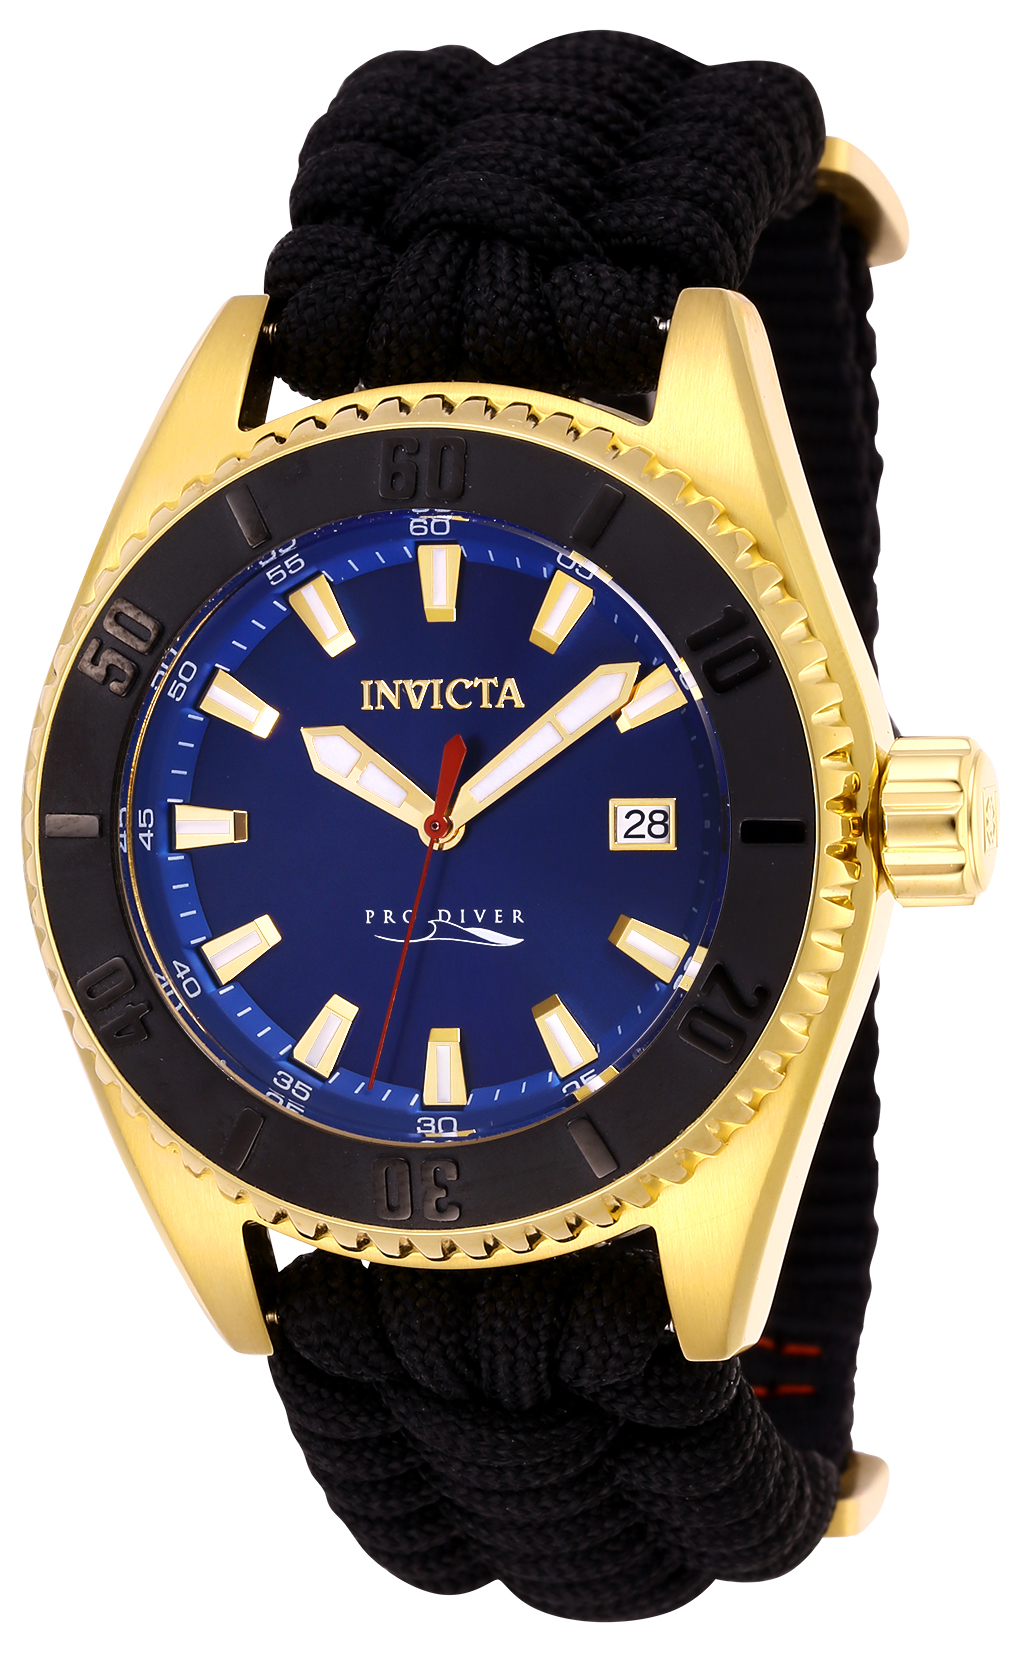 Pre-Owned Invicta Pro Diver Automatic Men's Watch - 46mm Stainless Steel Case, Nylon Band, Black (AIC-26025)